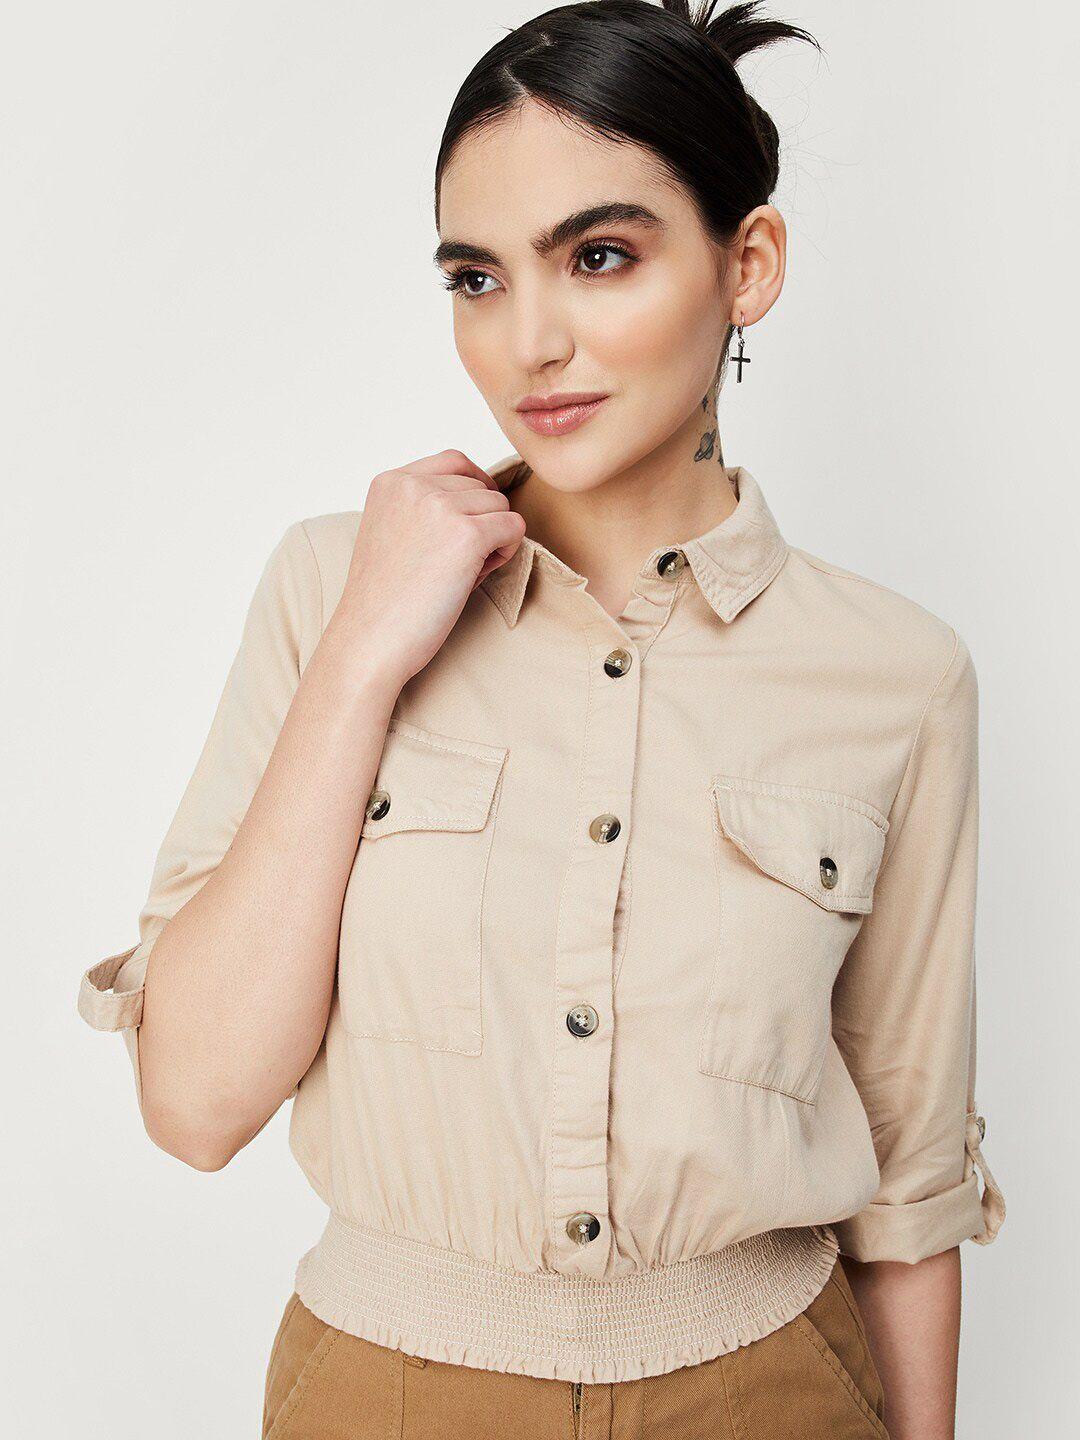 max cotton roll-up sleeves shirt style top